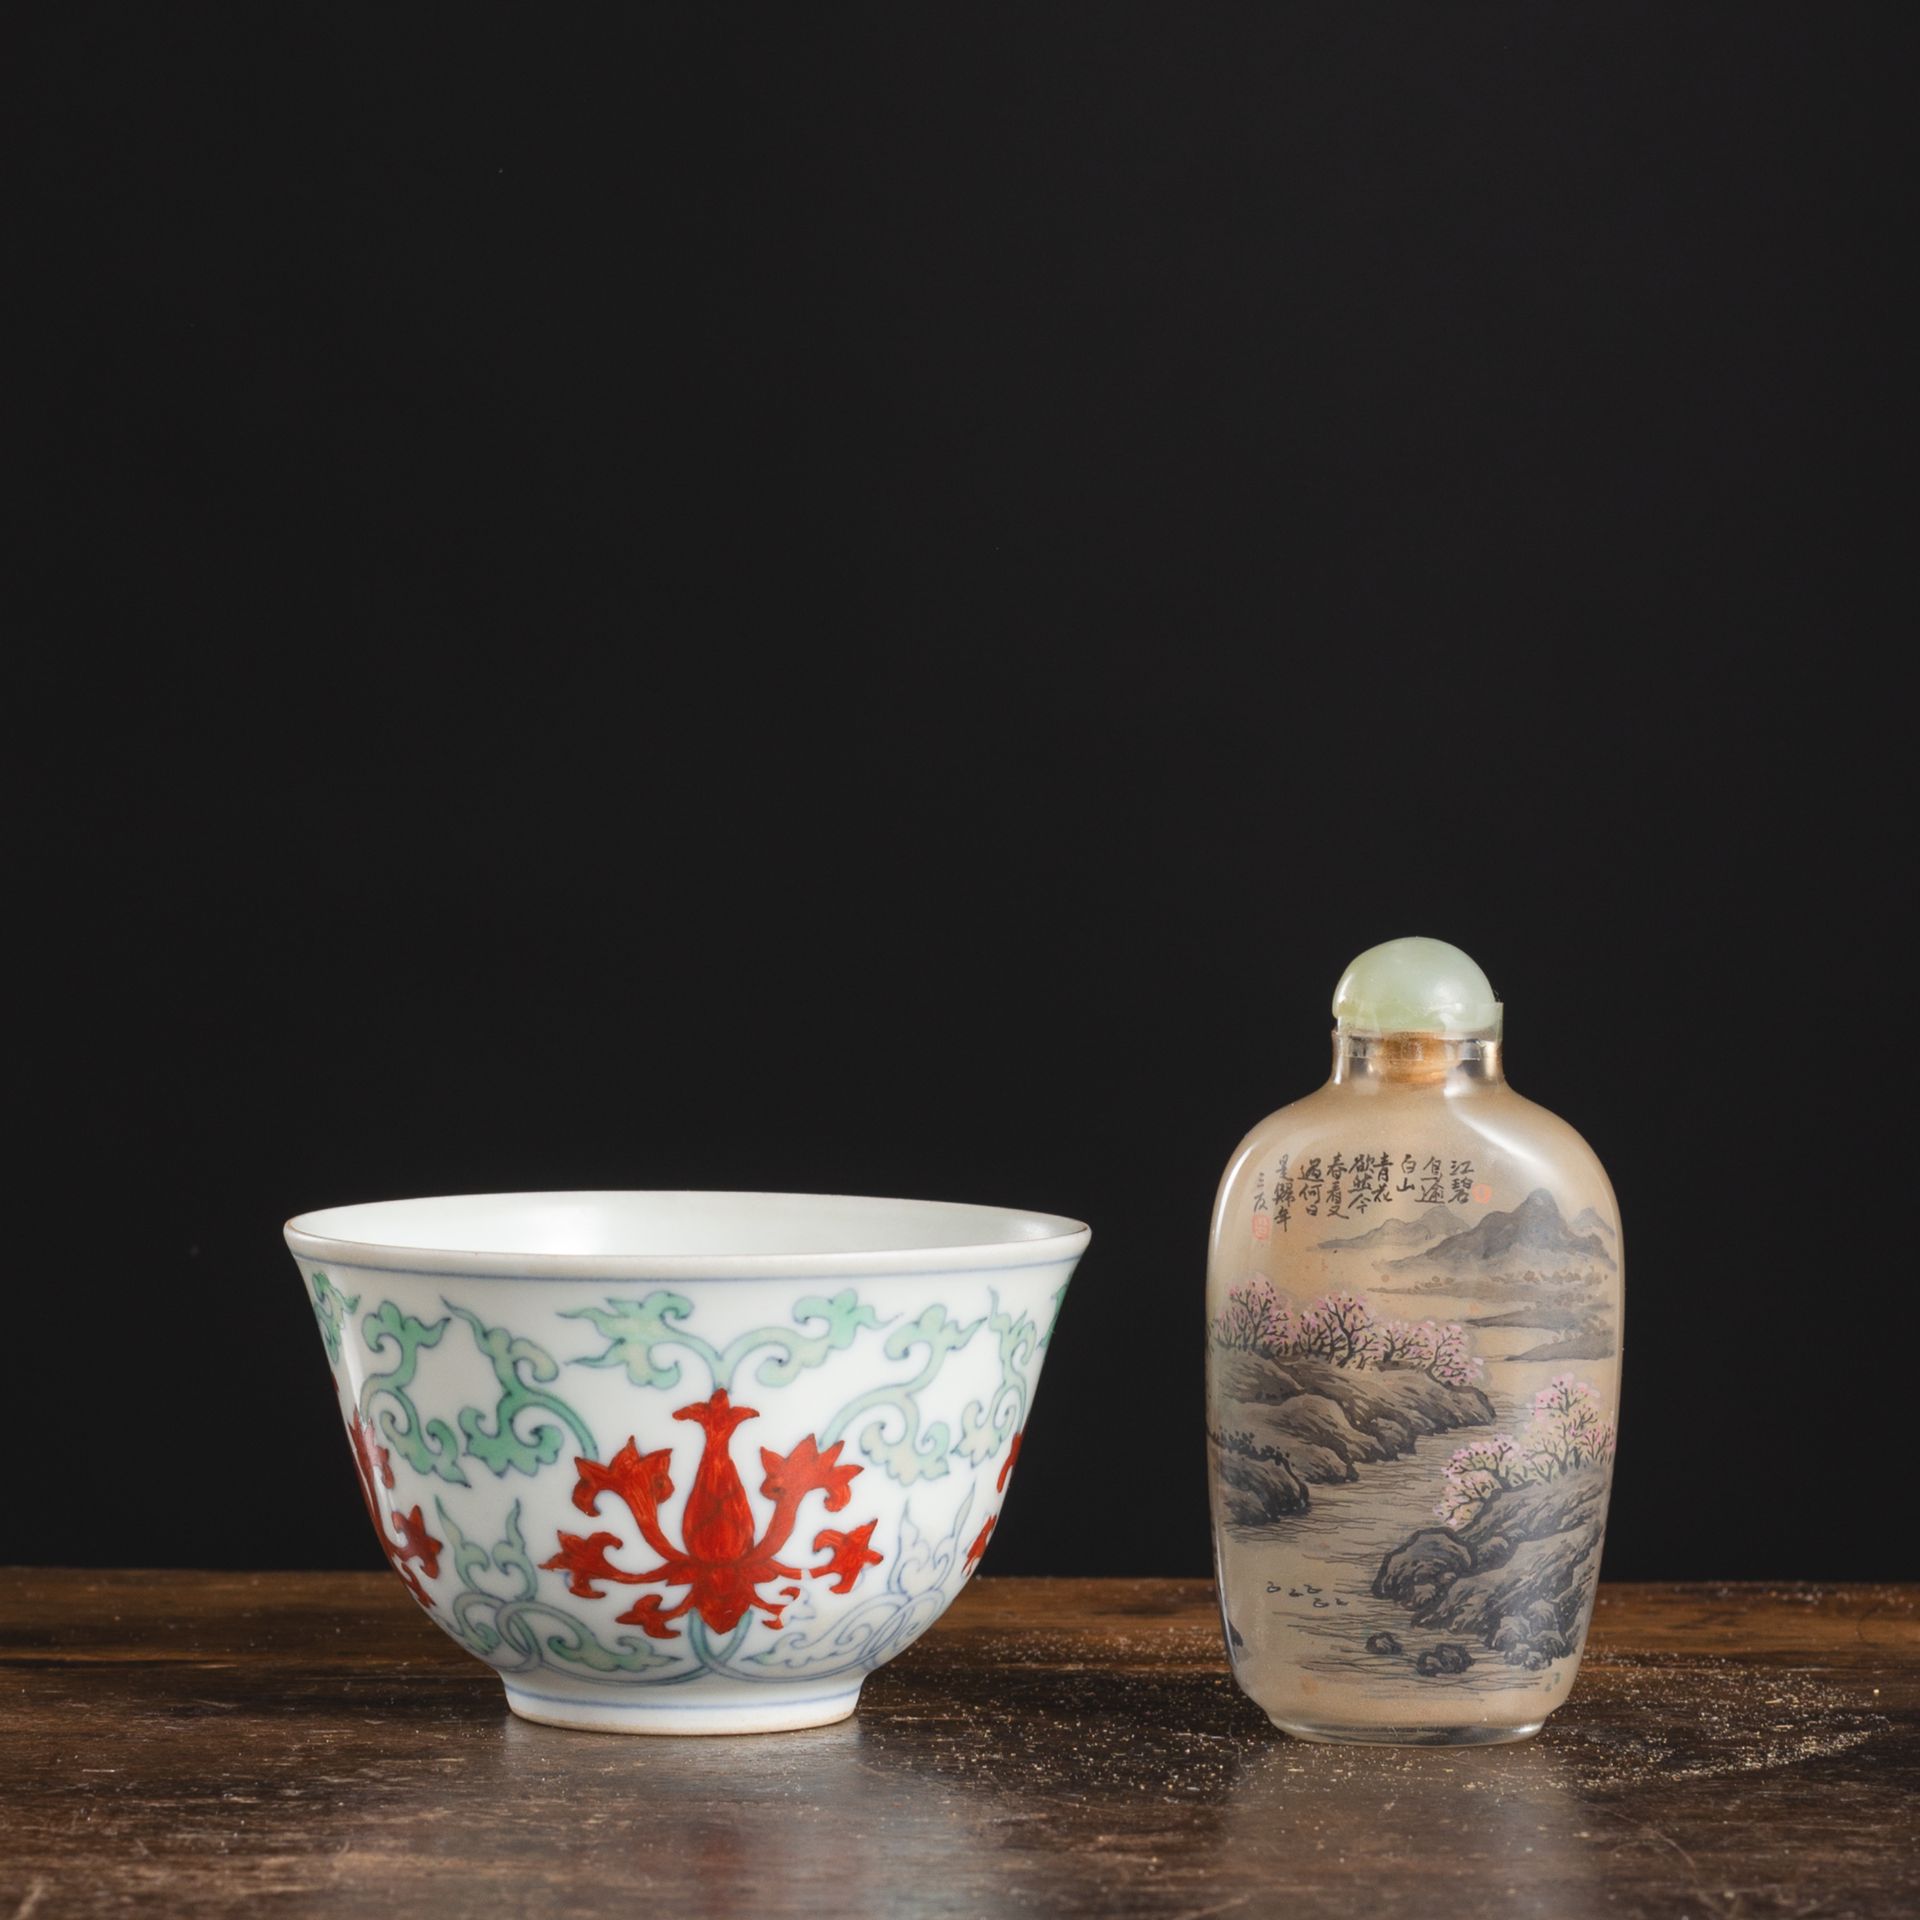 A SMALL 'DOUCAI' PORCELAIN CUP AND AN INSIDE-PAINTED GLASS SNUFFBOTTLE